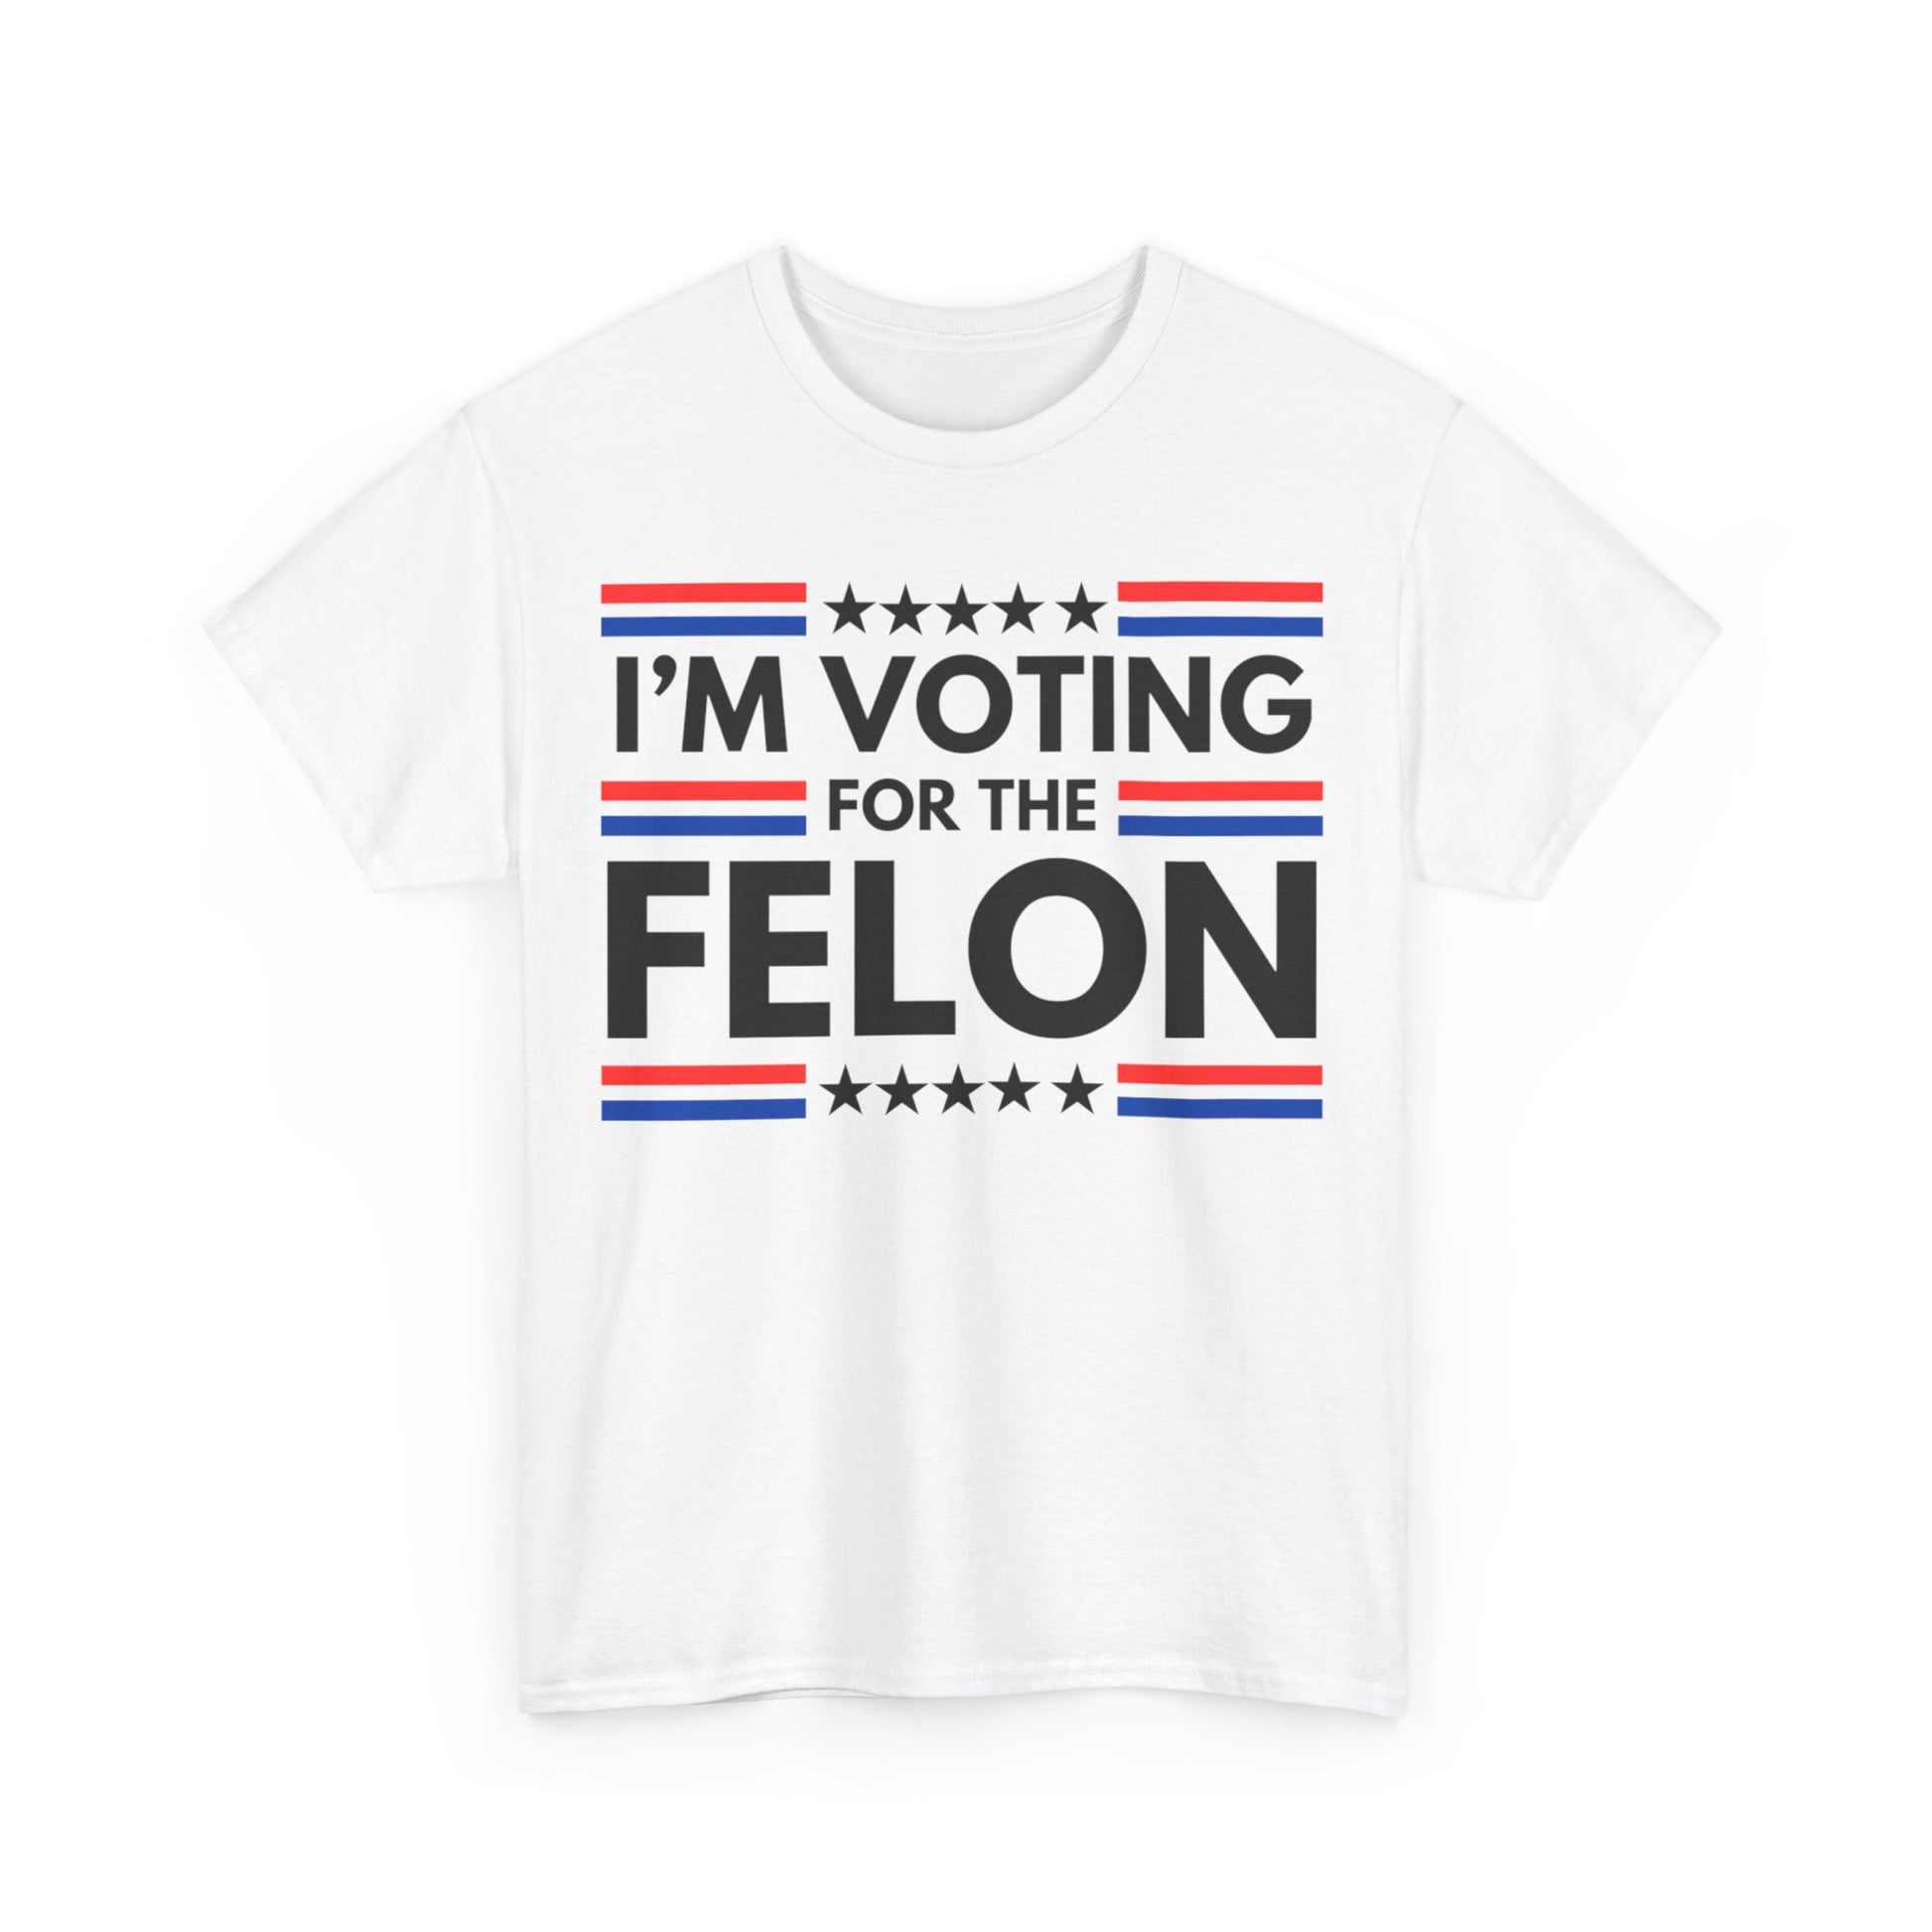 Get trendy with "I'm Voting for the felon" front side only Unisex Heavy Cotton Tee - T-Shirt available at Good Gift Company. Grab yours for $13.65 today!